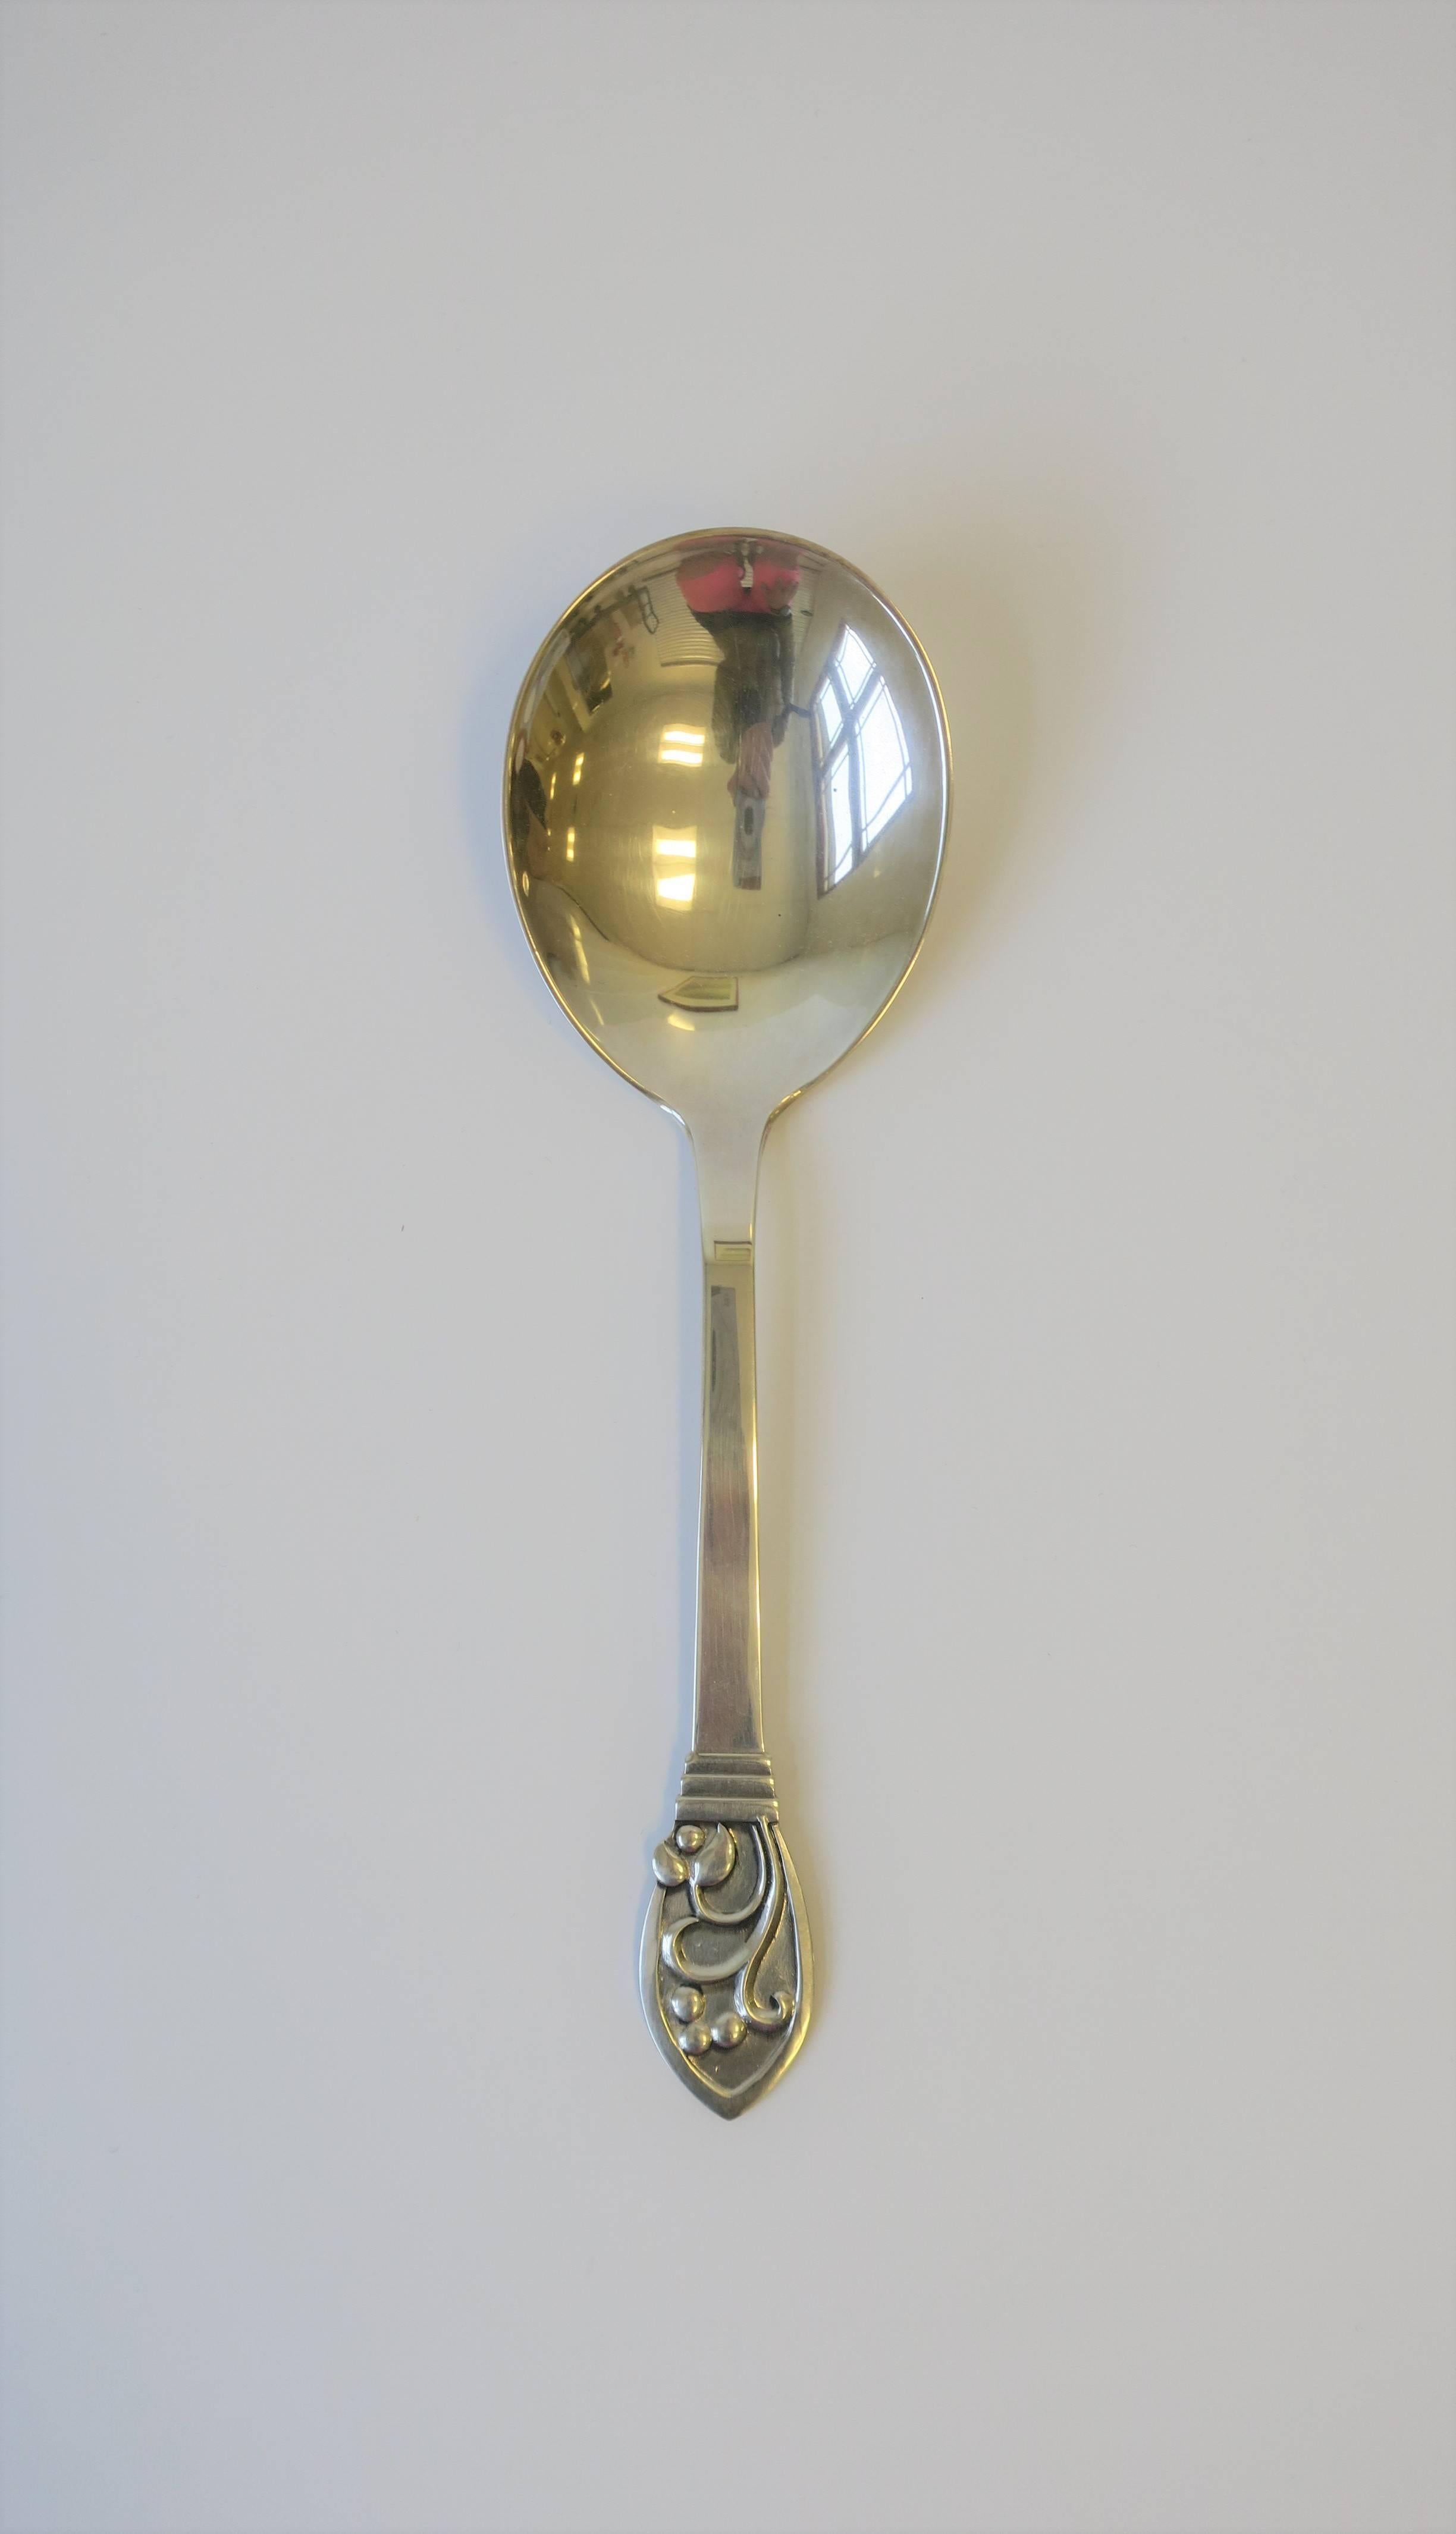 A beautiful vintage Danish sterling silver serving spoon with decorative handle in the organic modern style, circa mid-20th century, Denmark. Spoon is with maker's mark and marked '